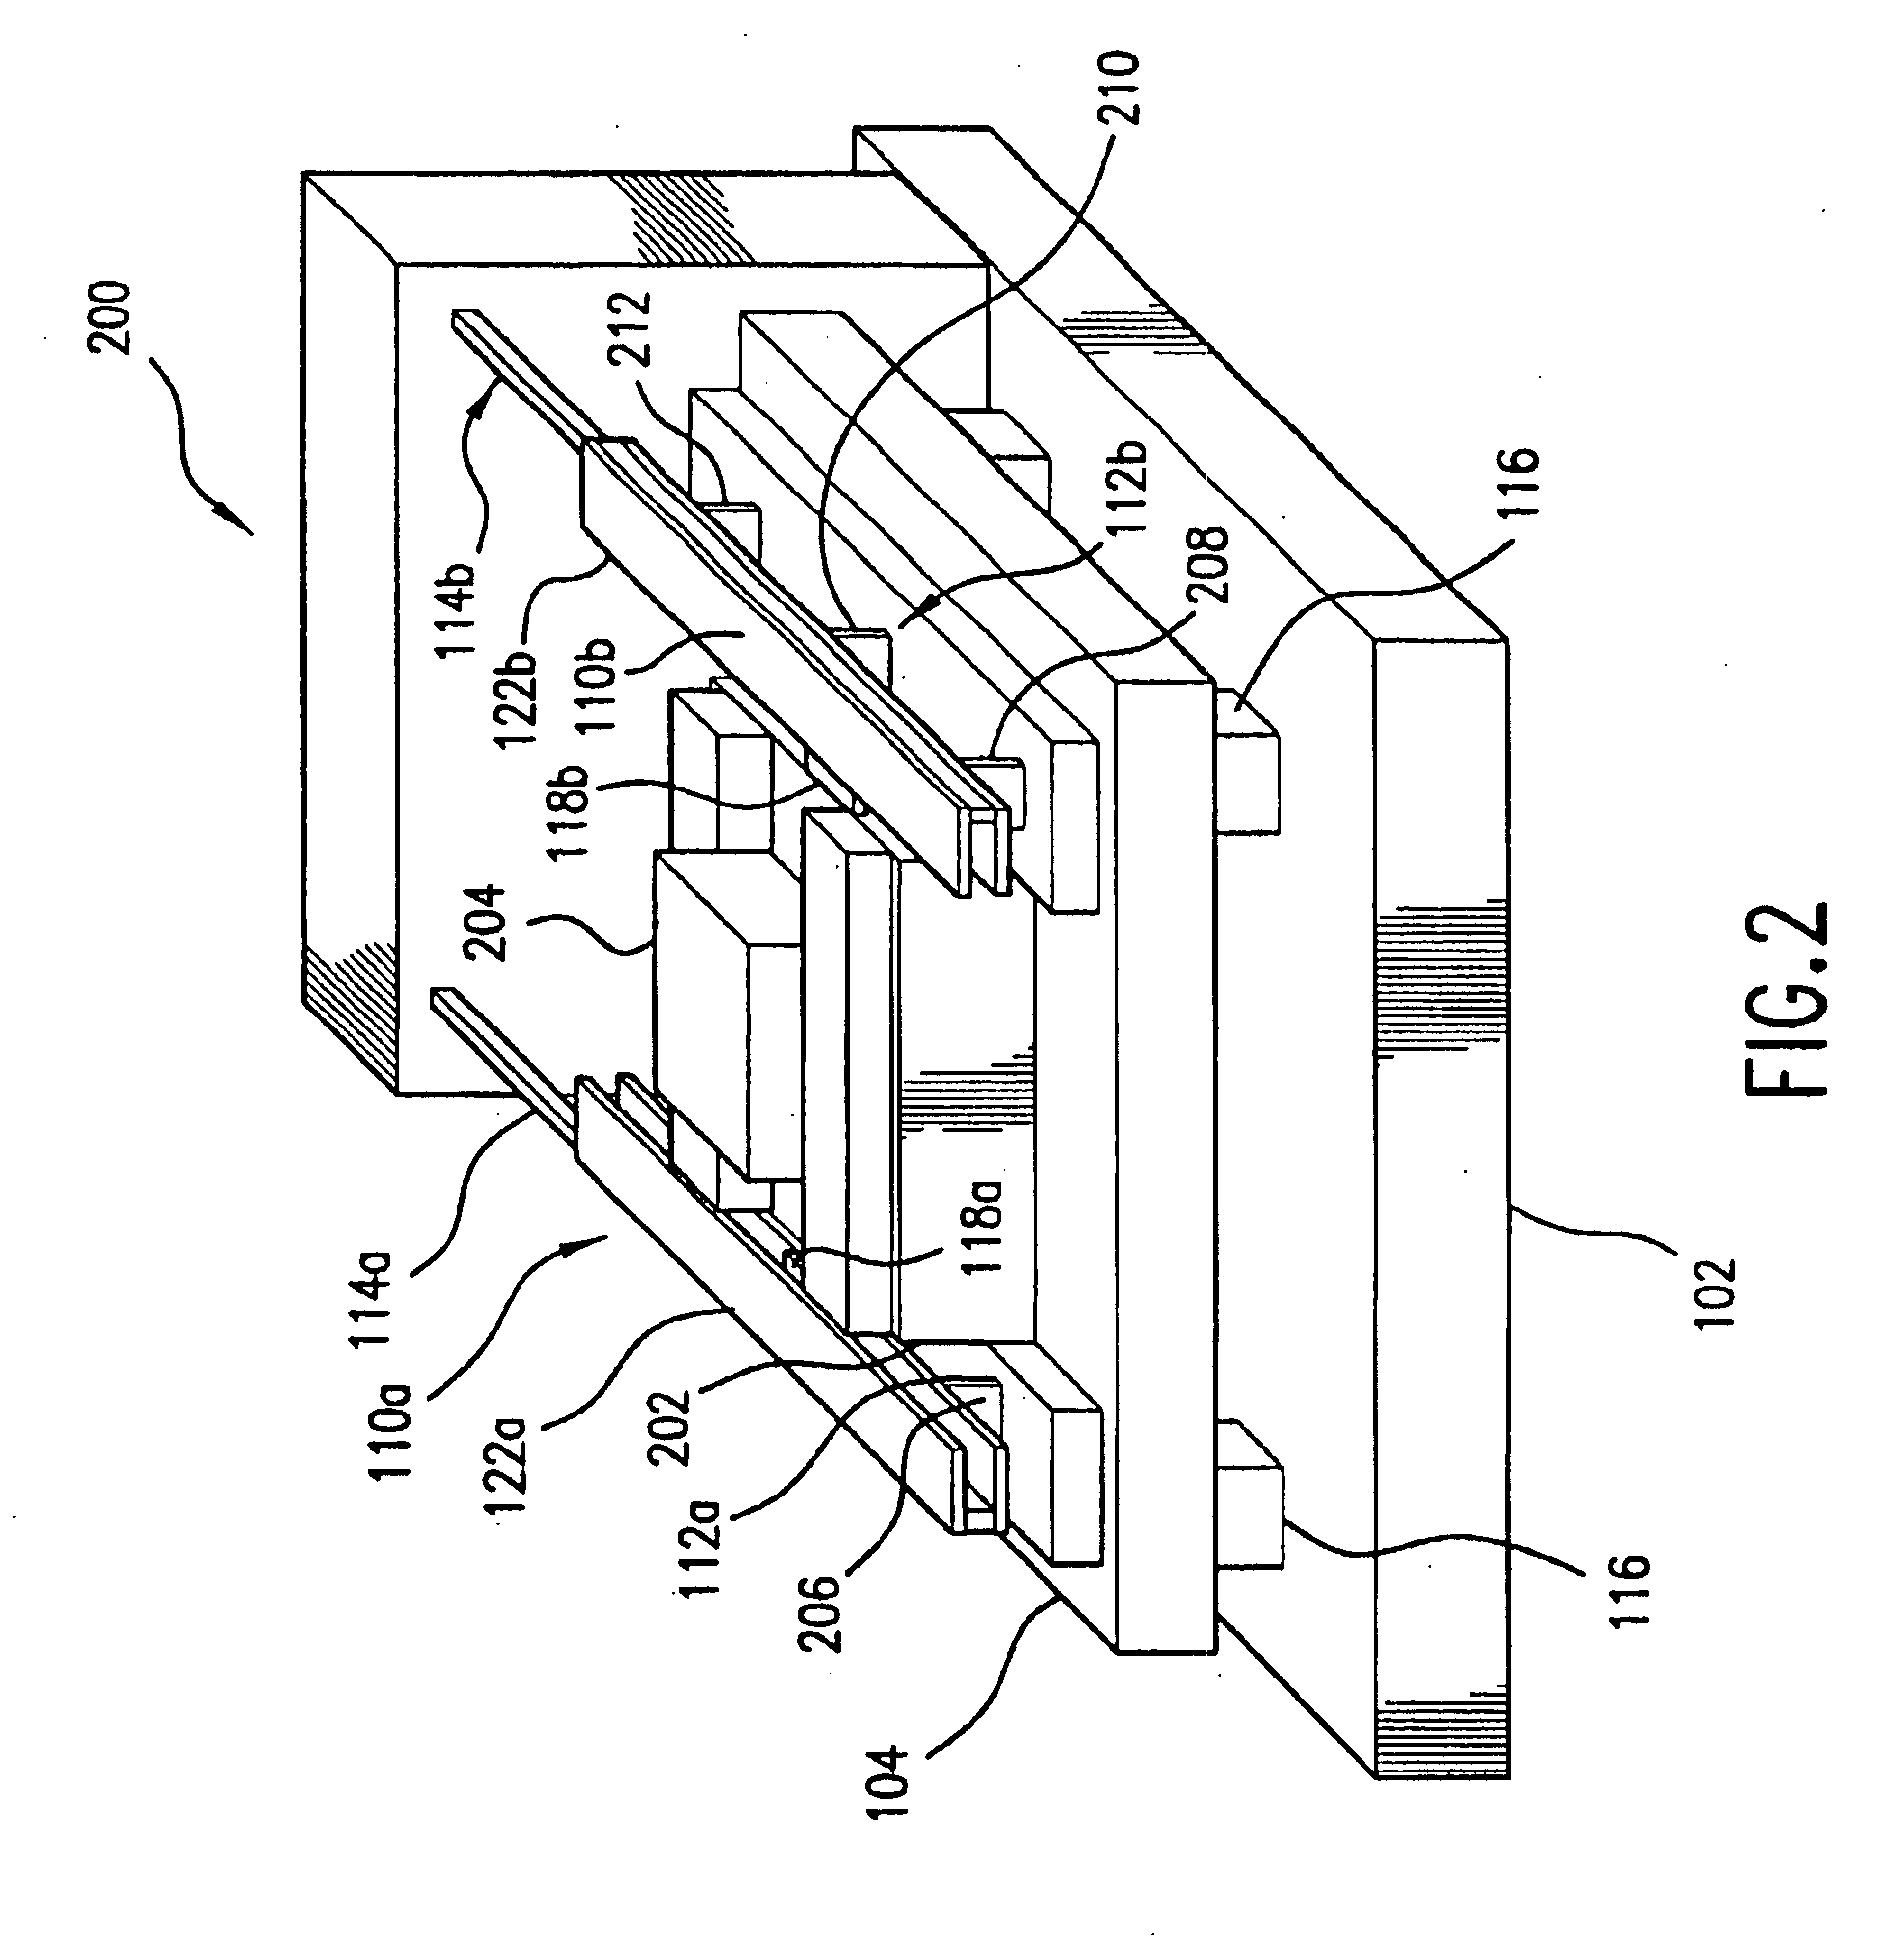 Method, system, and apparatus for management of reaction loads in a lithography system